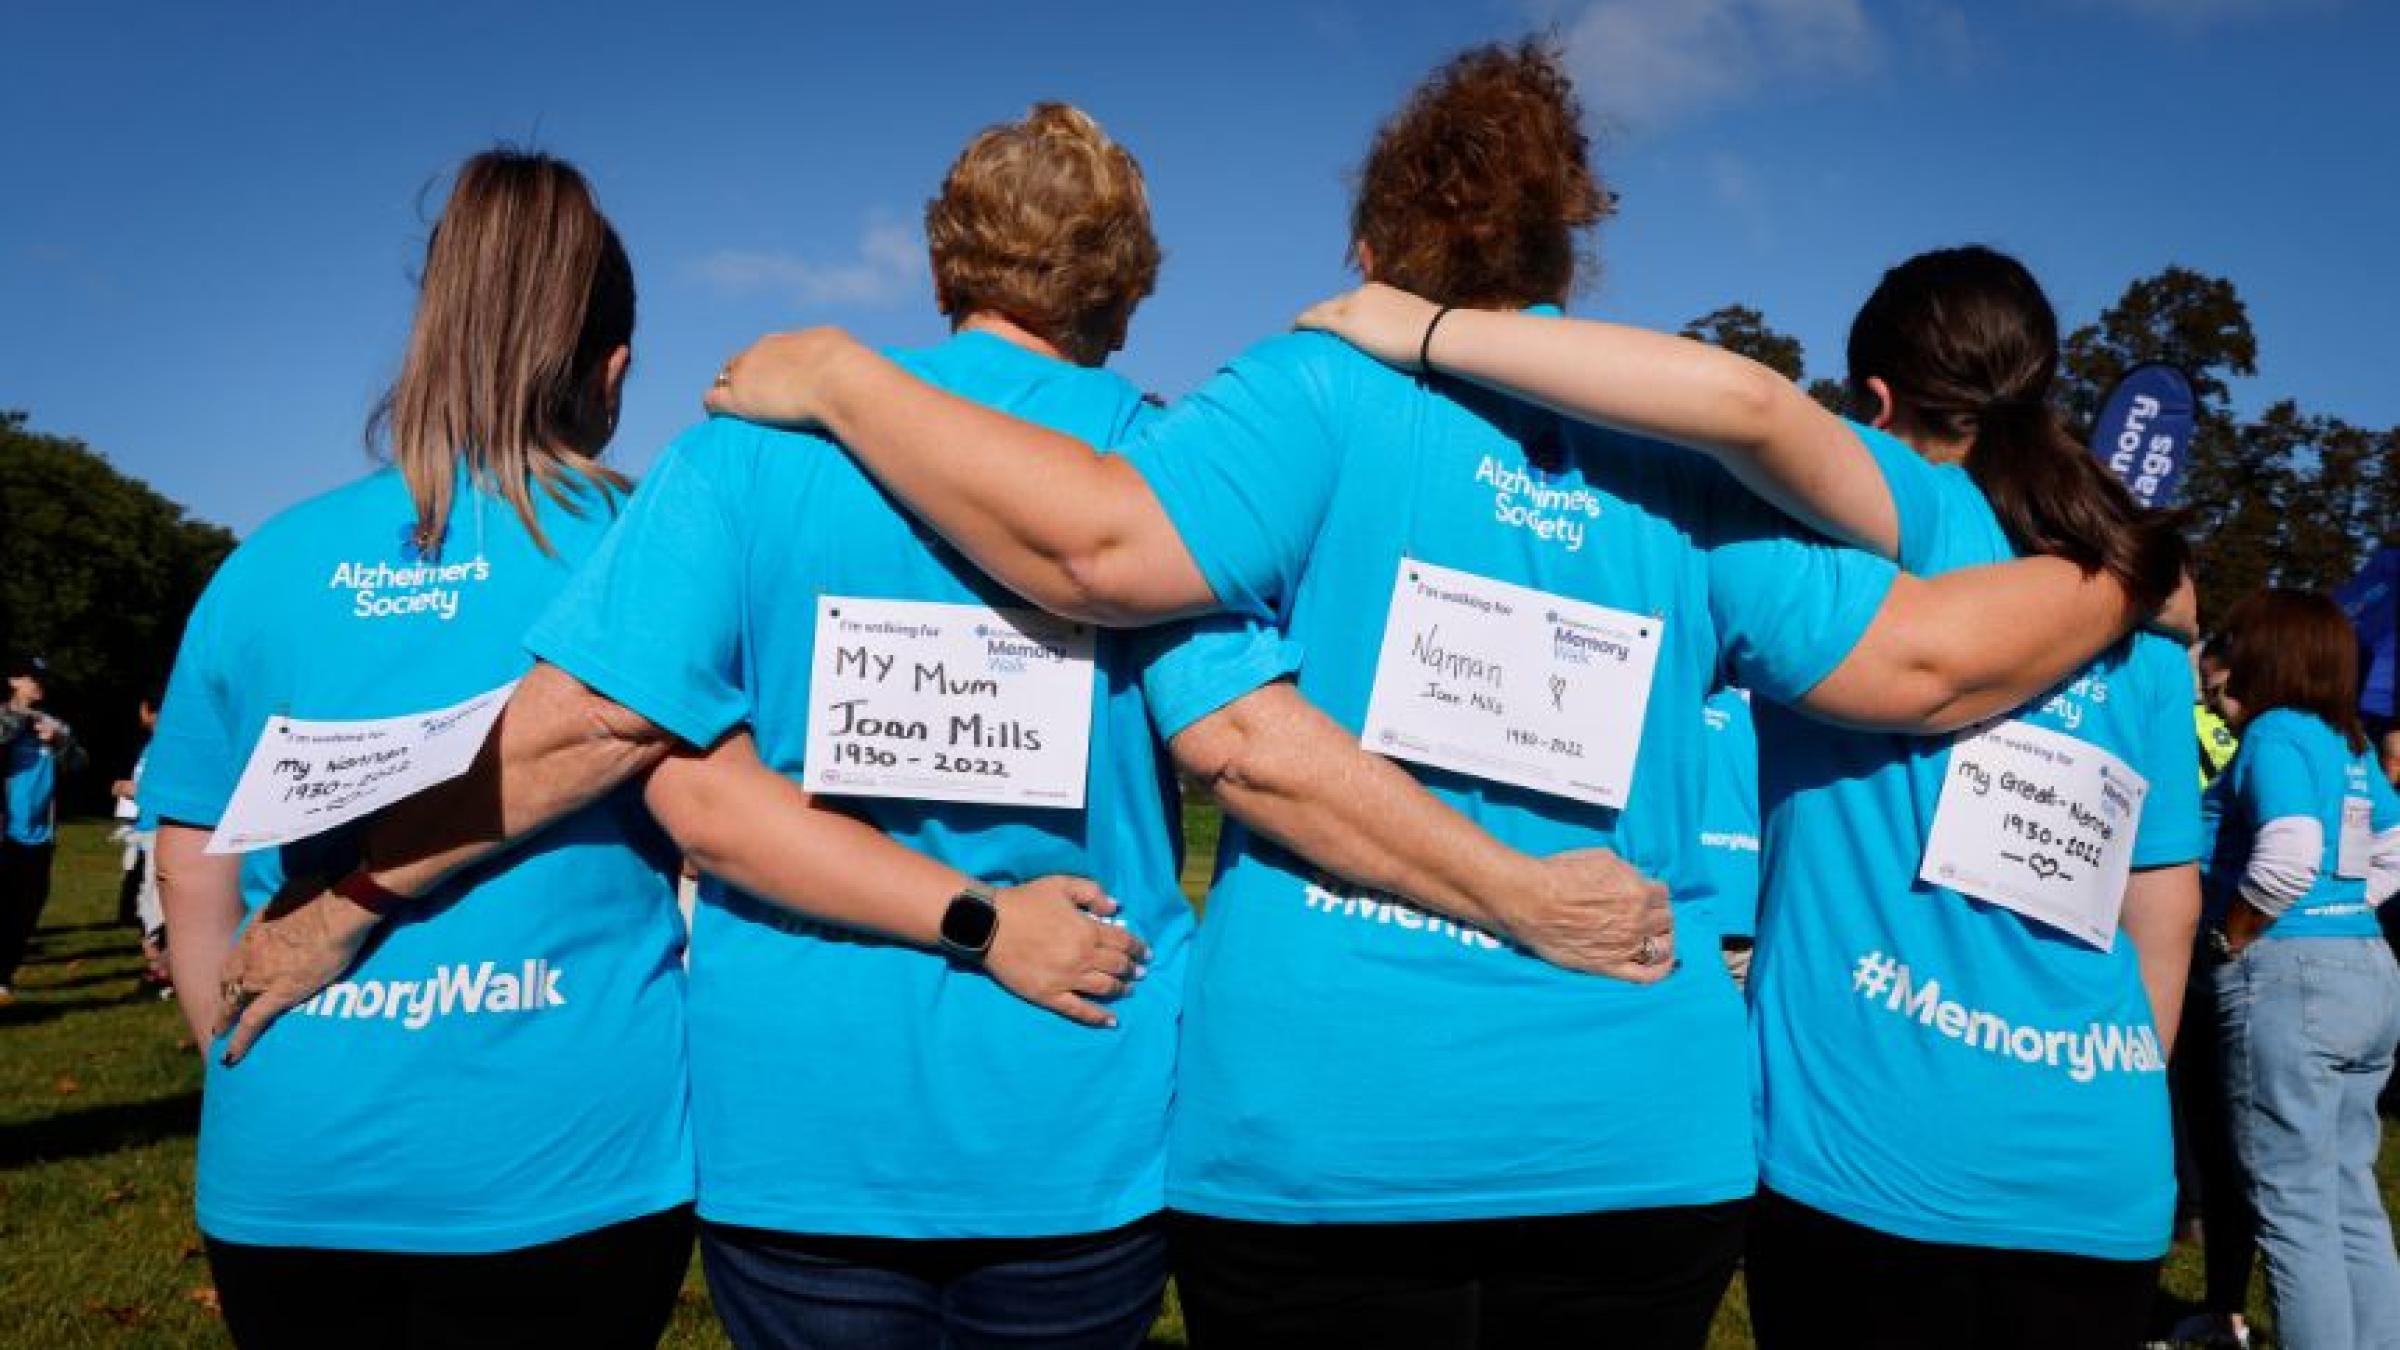 4 people arm in arm with their back to the camera, wearing blue Memory Walk t-shirts